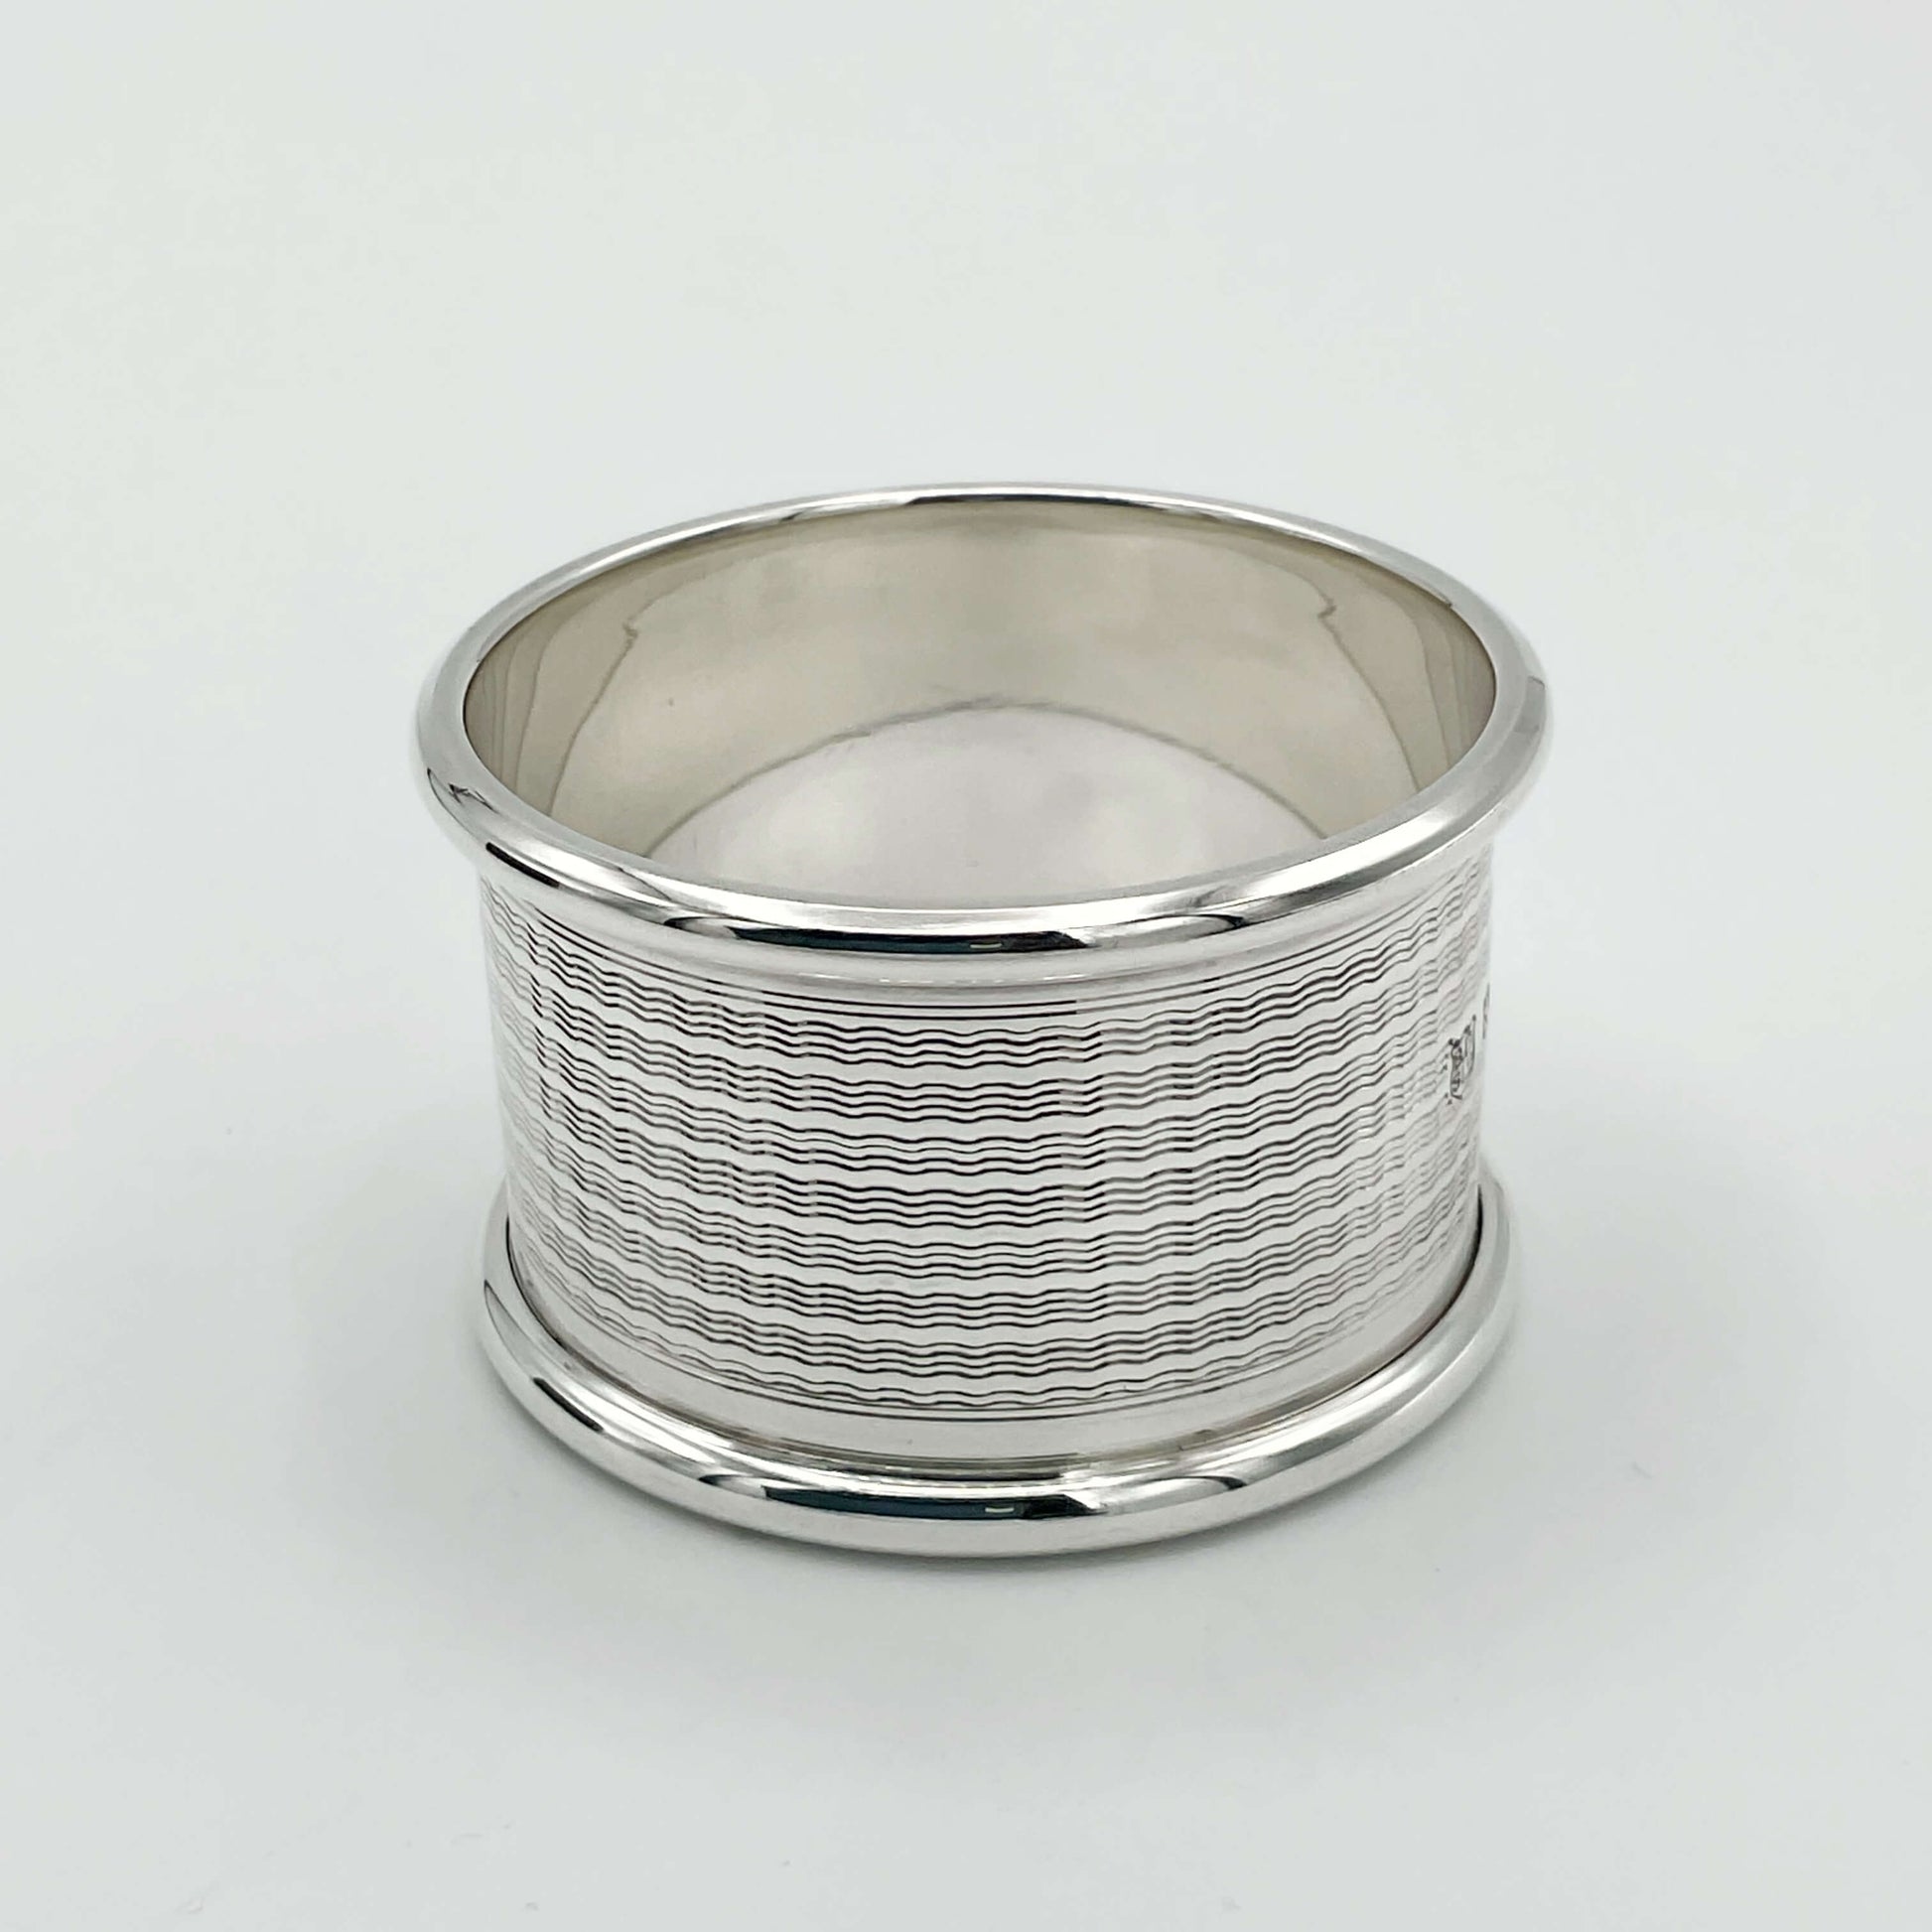 Beautiful lined design to the vintage silver napkin ring on a plain white background